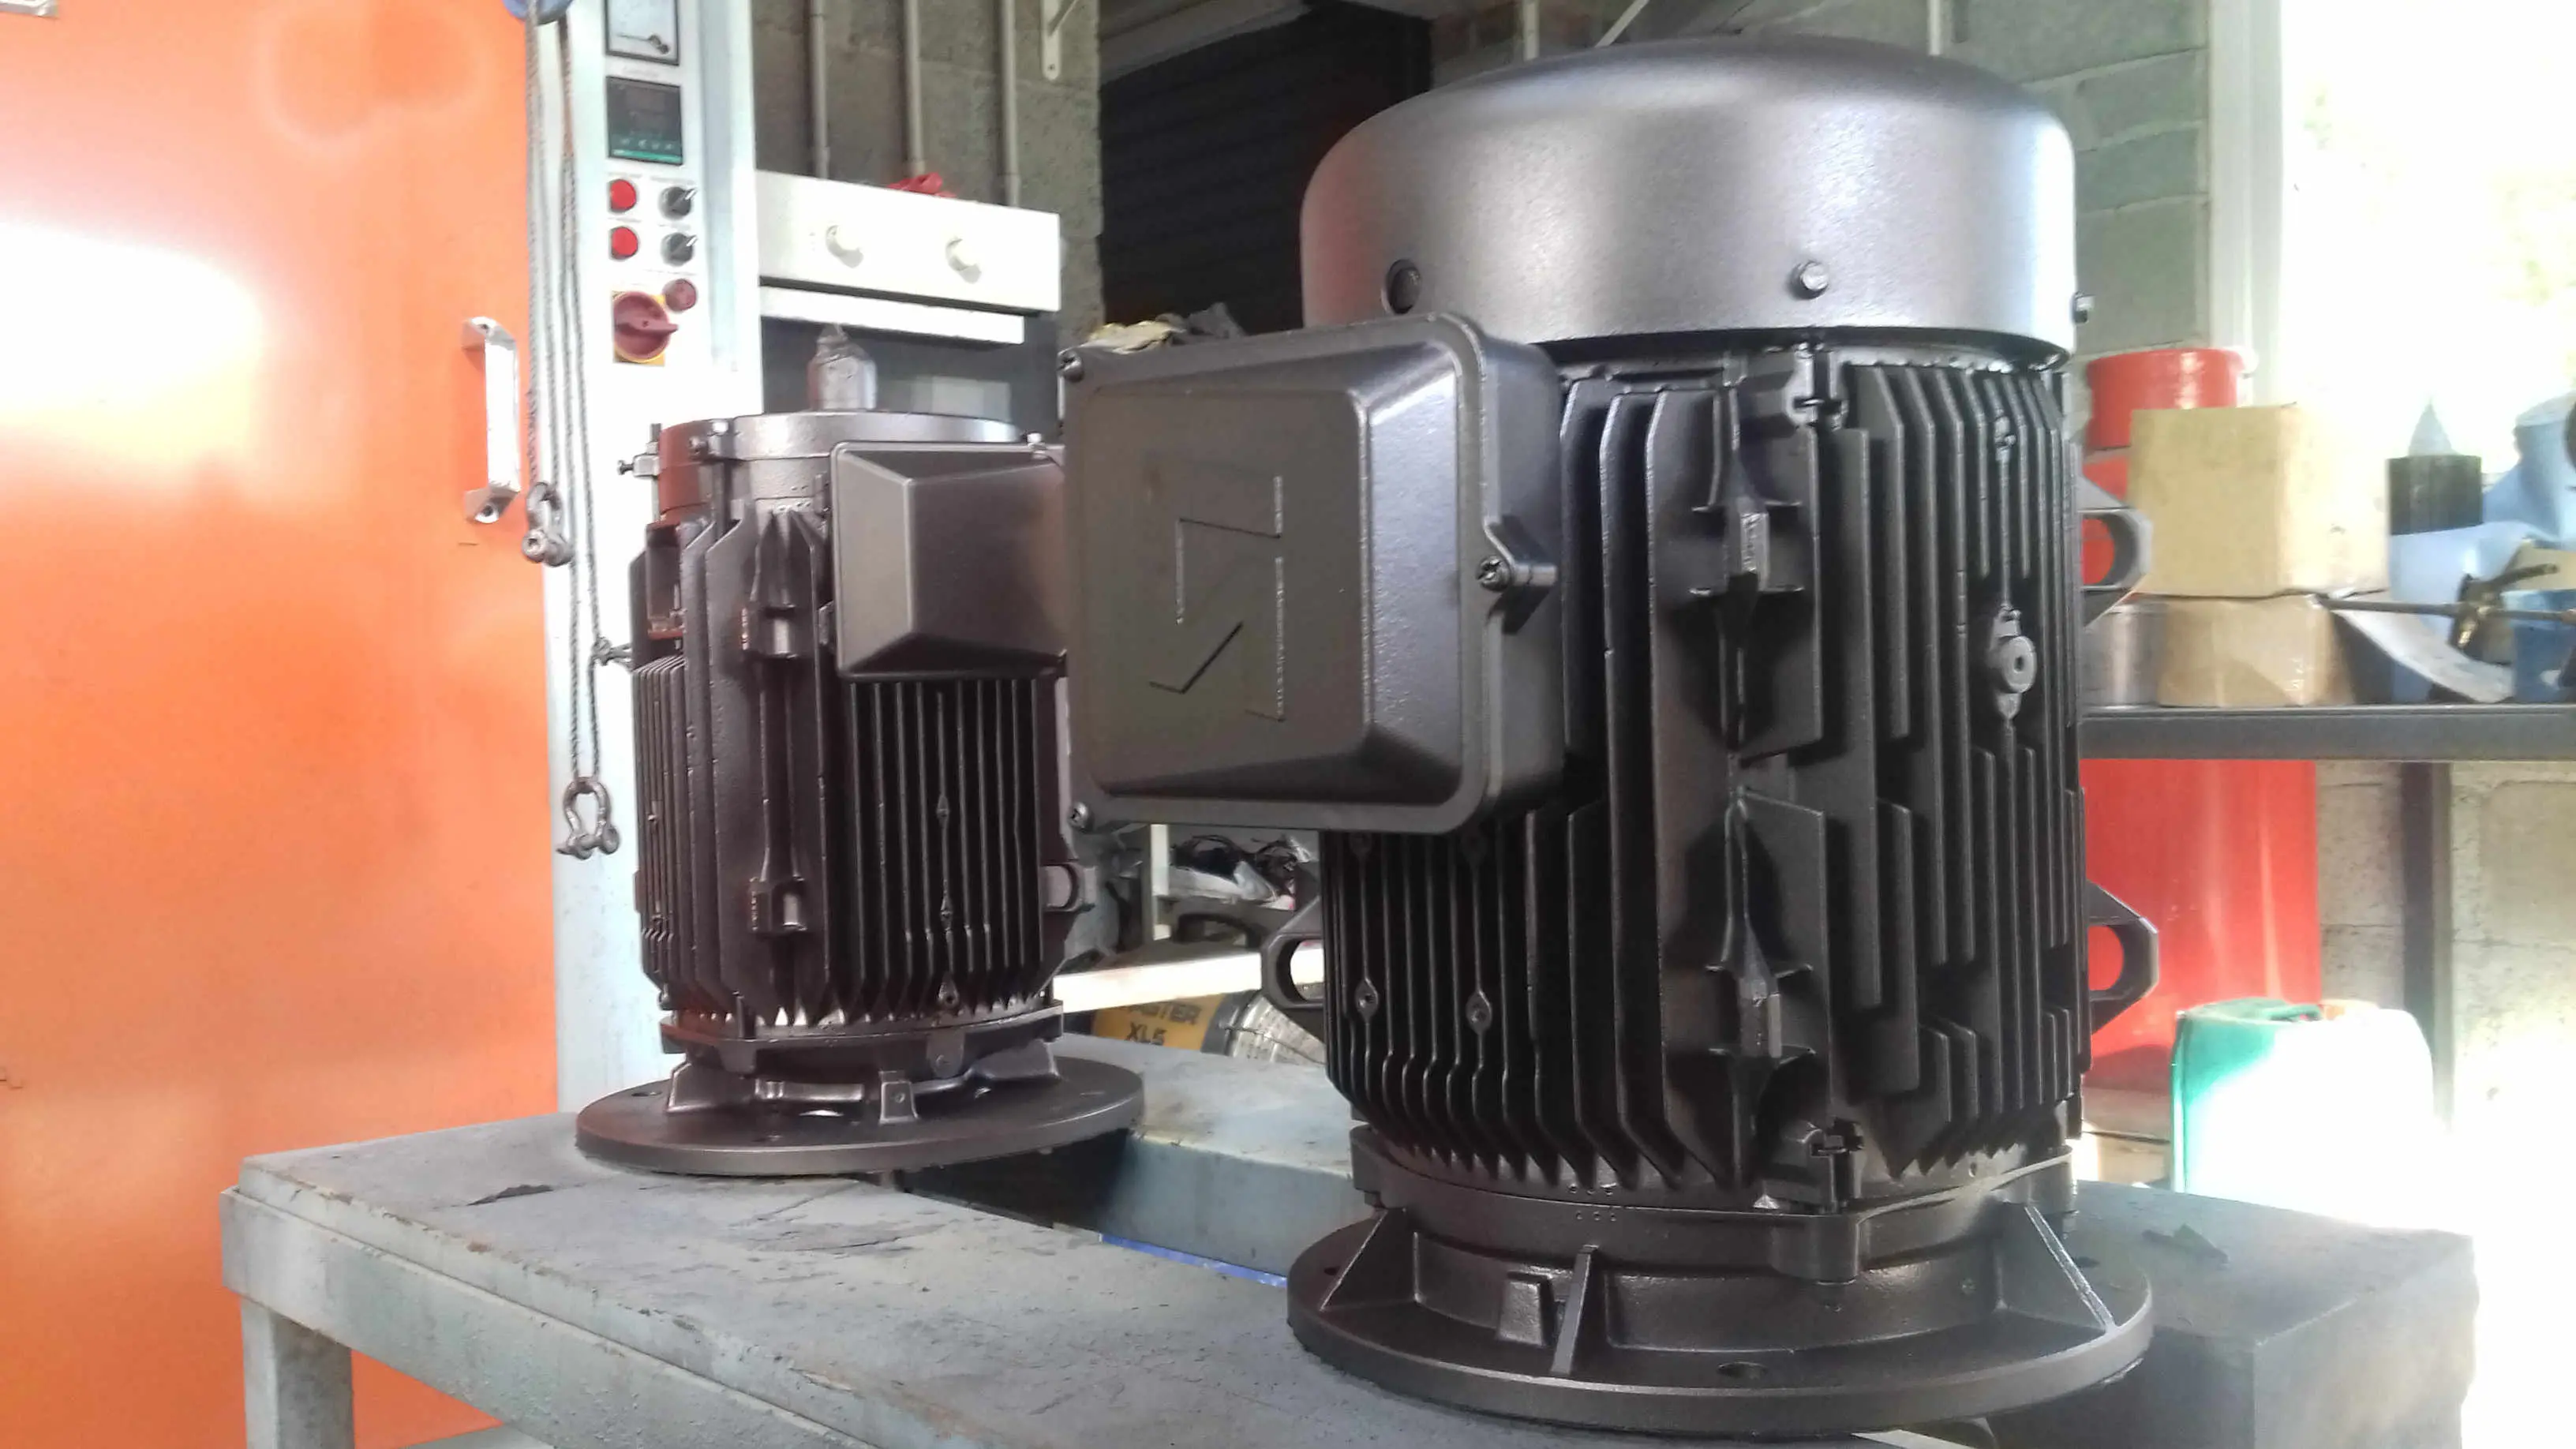 11.5 and 18.5 kilowatt motors rewound, painted and ready for delivery back to the customer.